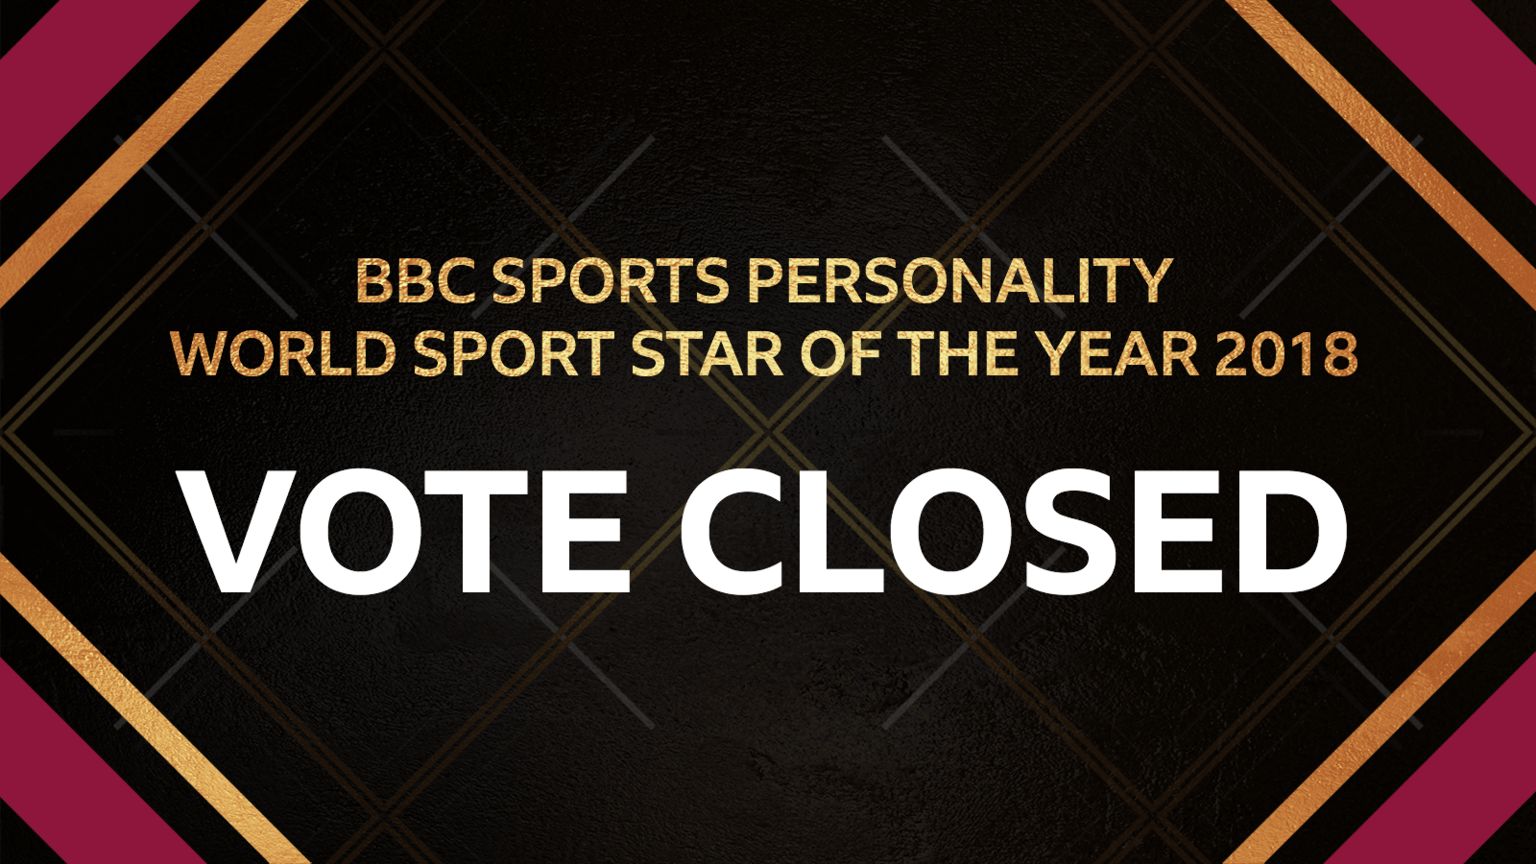 World Sport Star of the Year voting has now closed